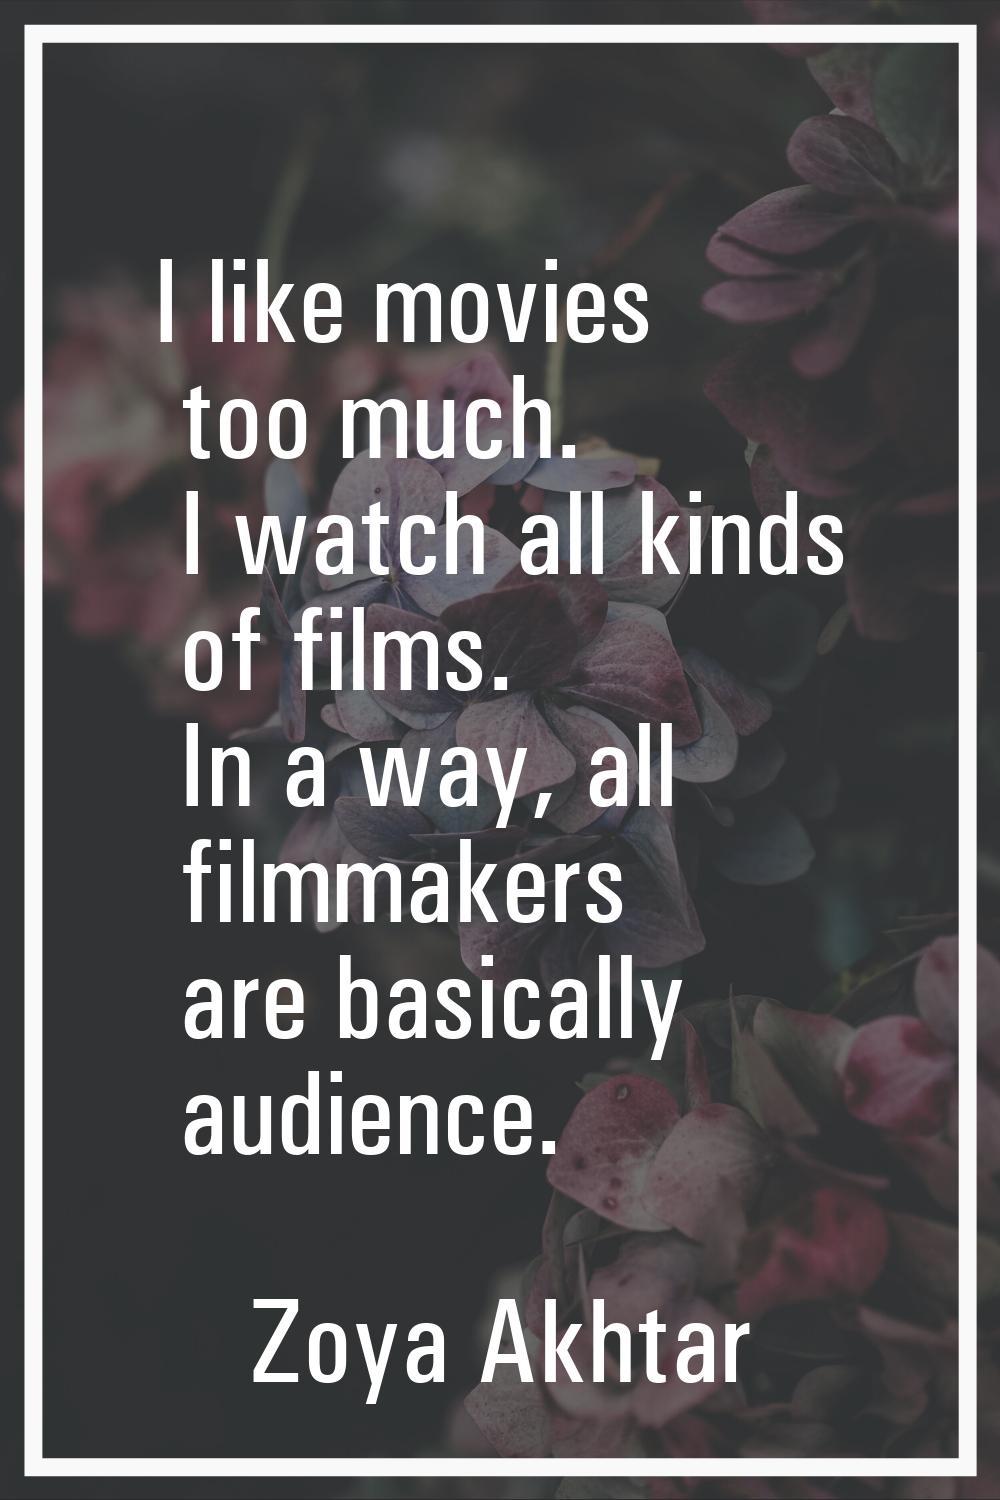 I like movies too much. I watch all kinds of films. In a way, all filmmakers are basically audience